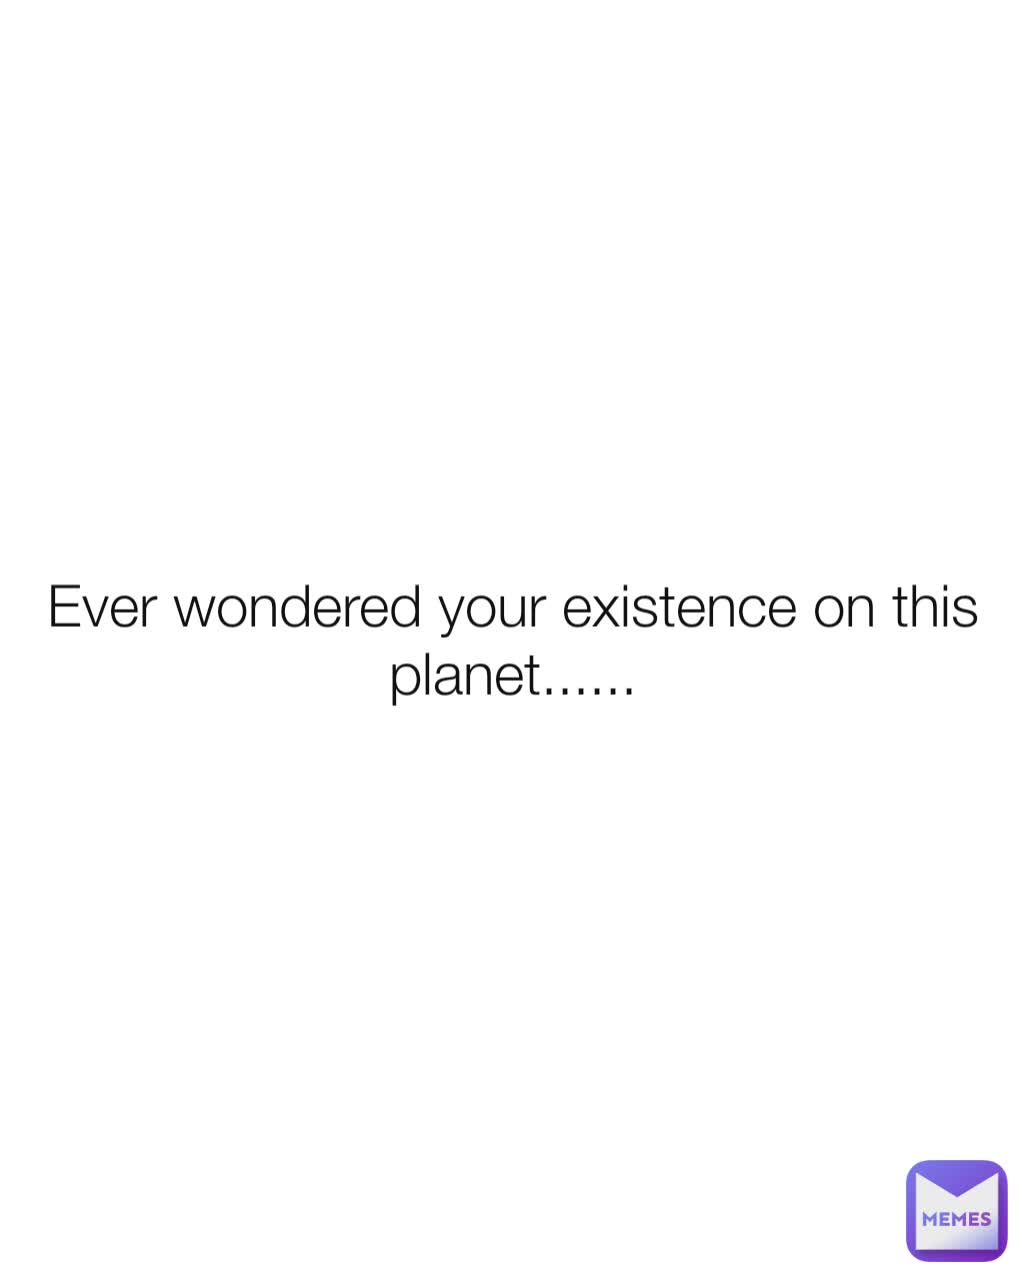 Ever wondered your existence on this planet......